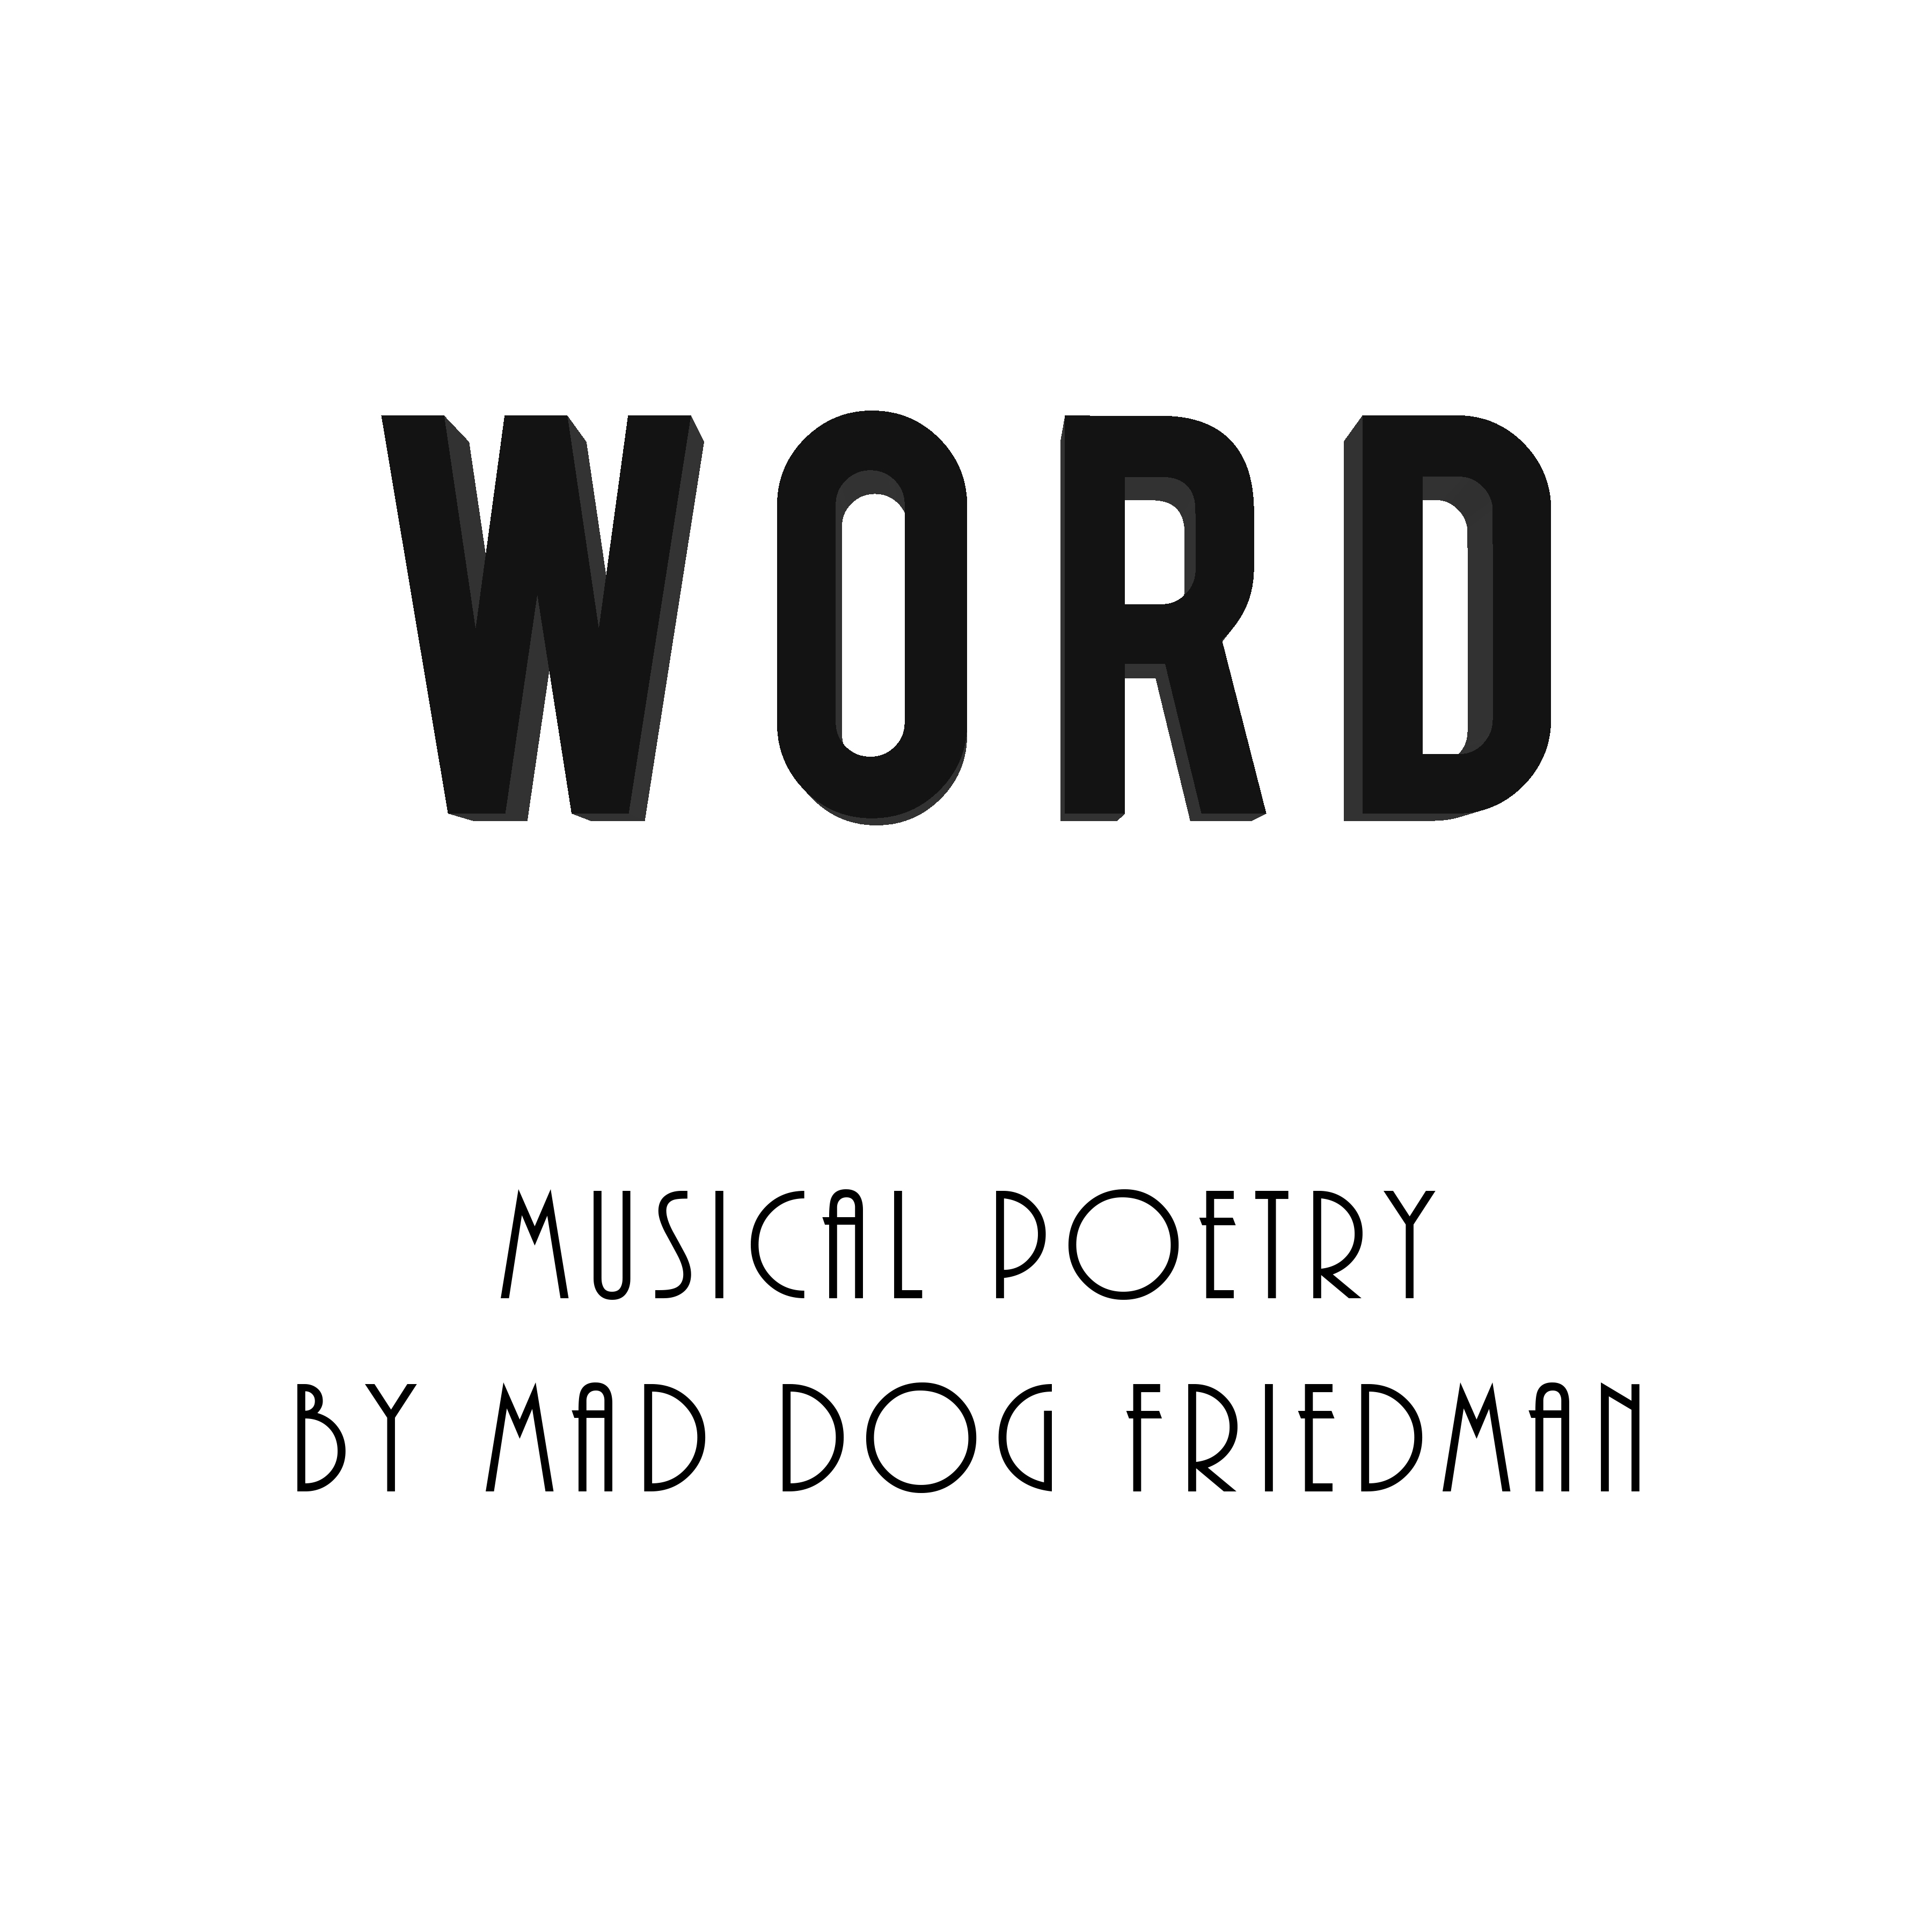 WORD, Musical Poetry by Mad Dog Friedman